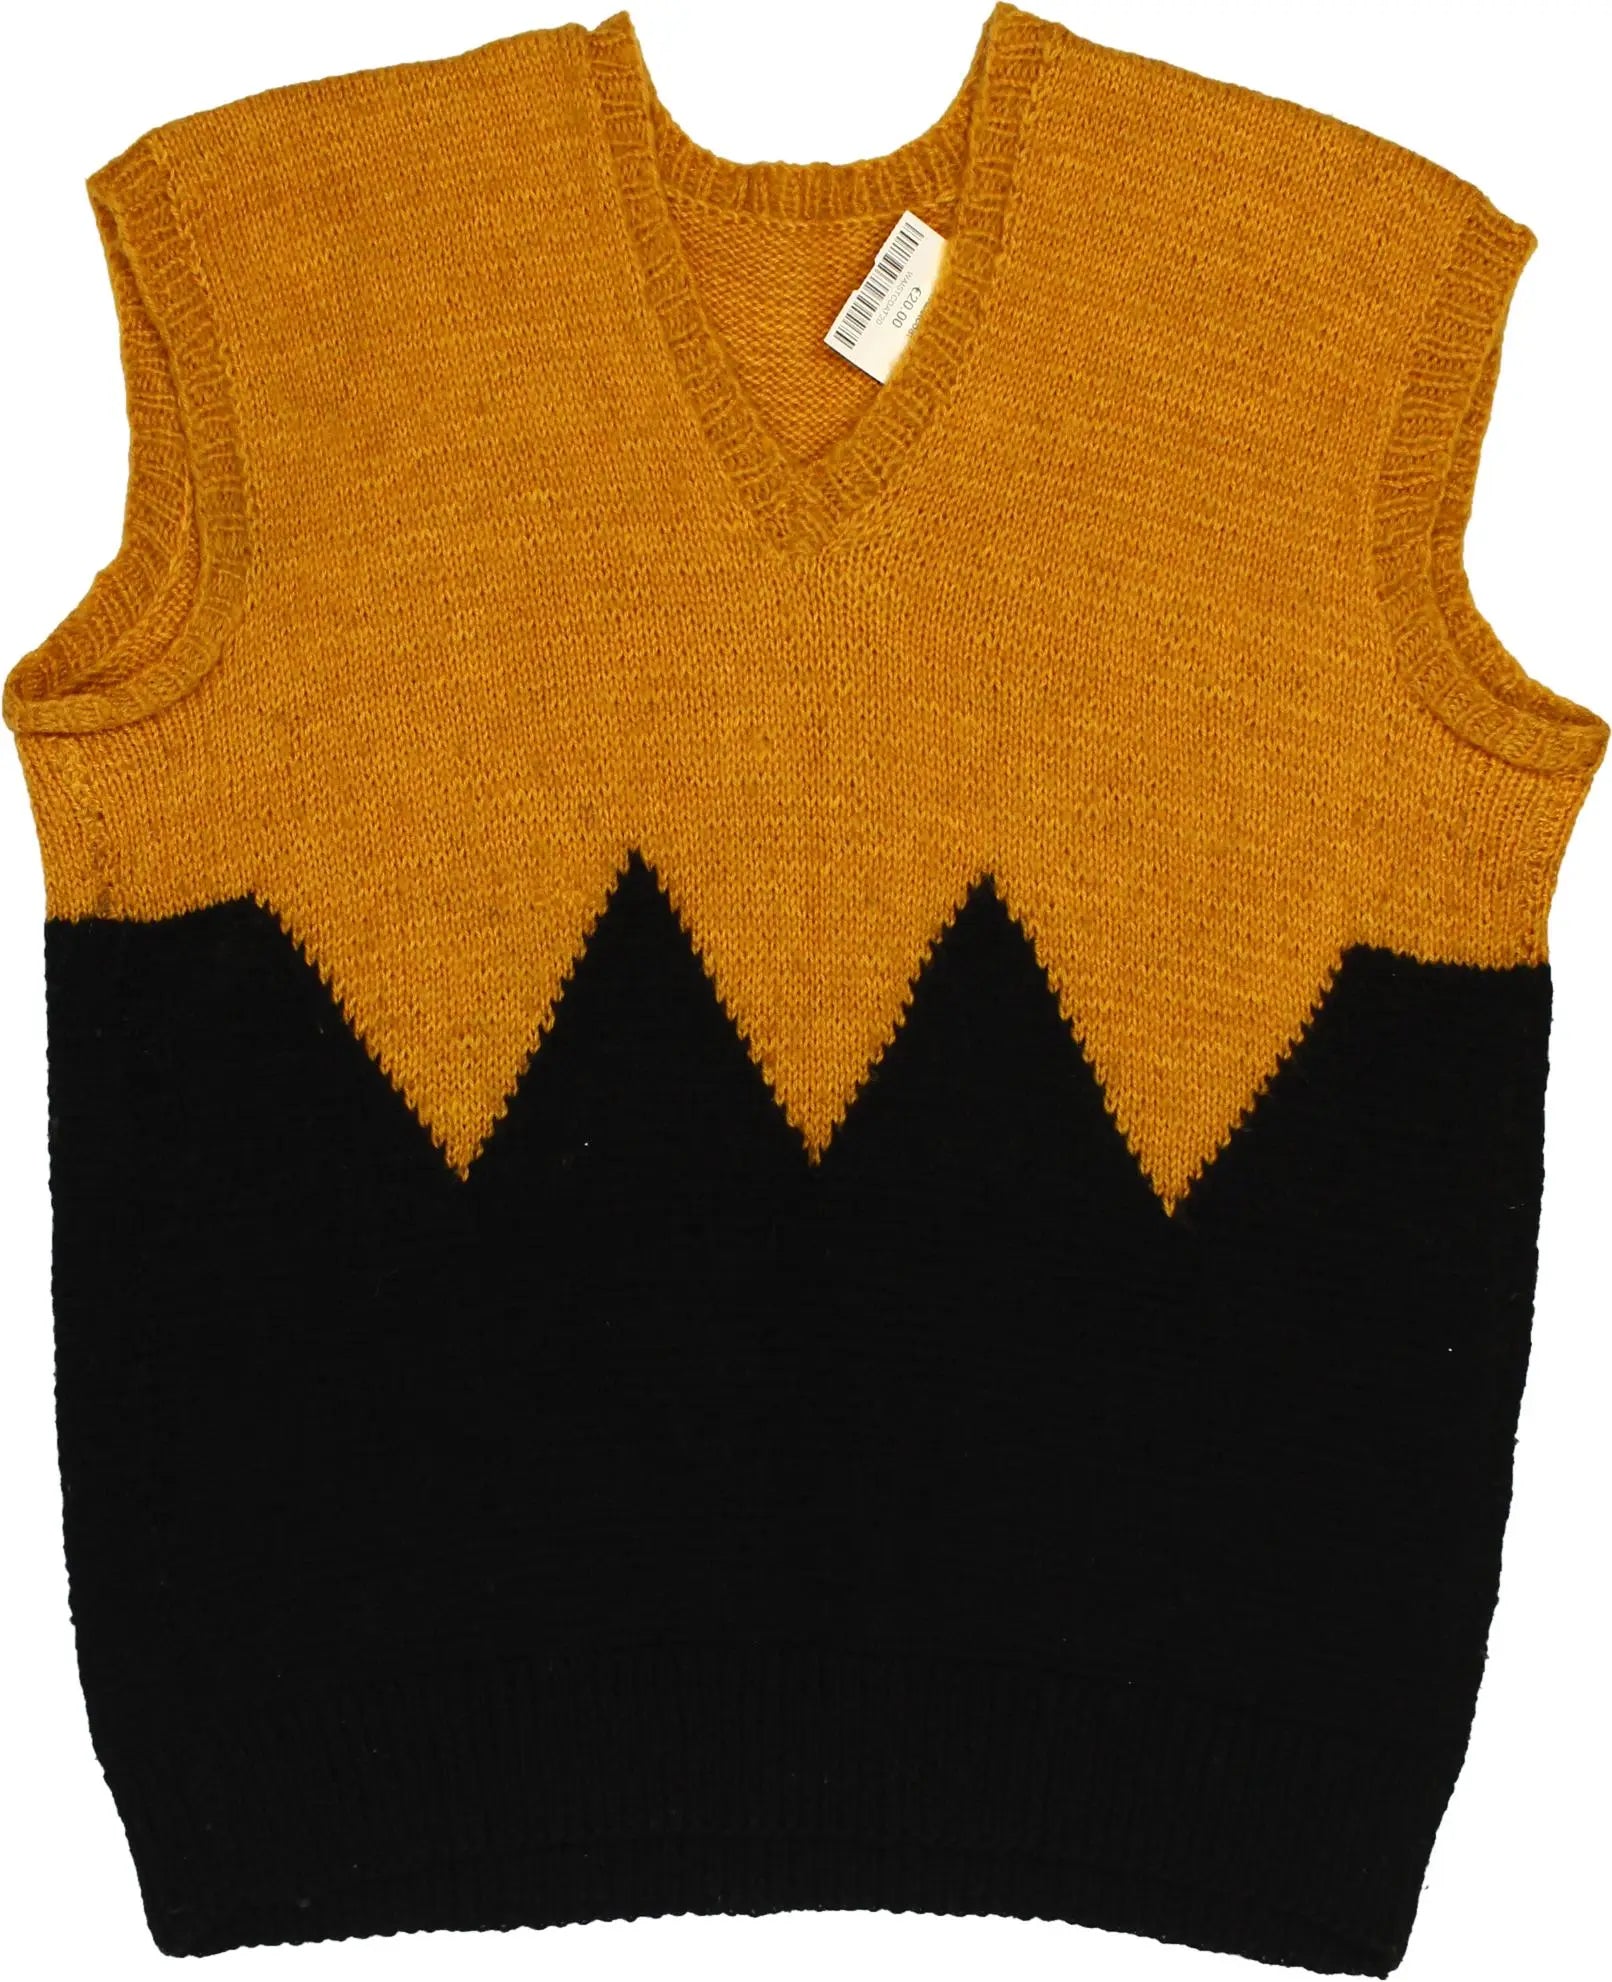 Handmade - Handknitted Vest- ThriftTale.com - Vintage and second handclothing